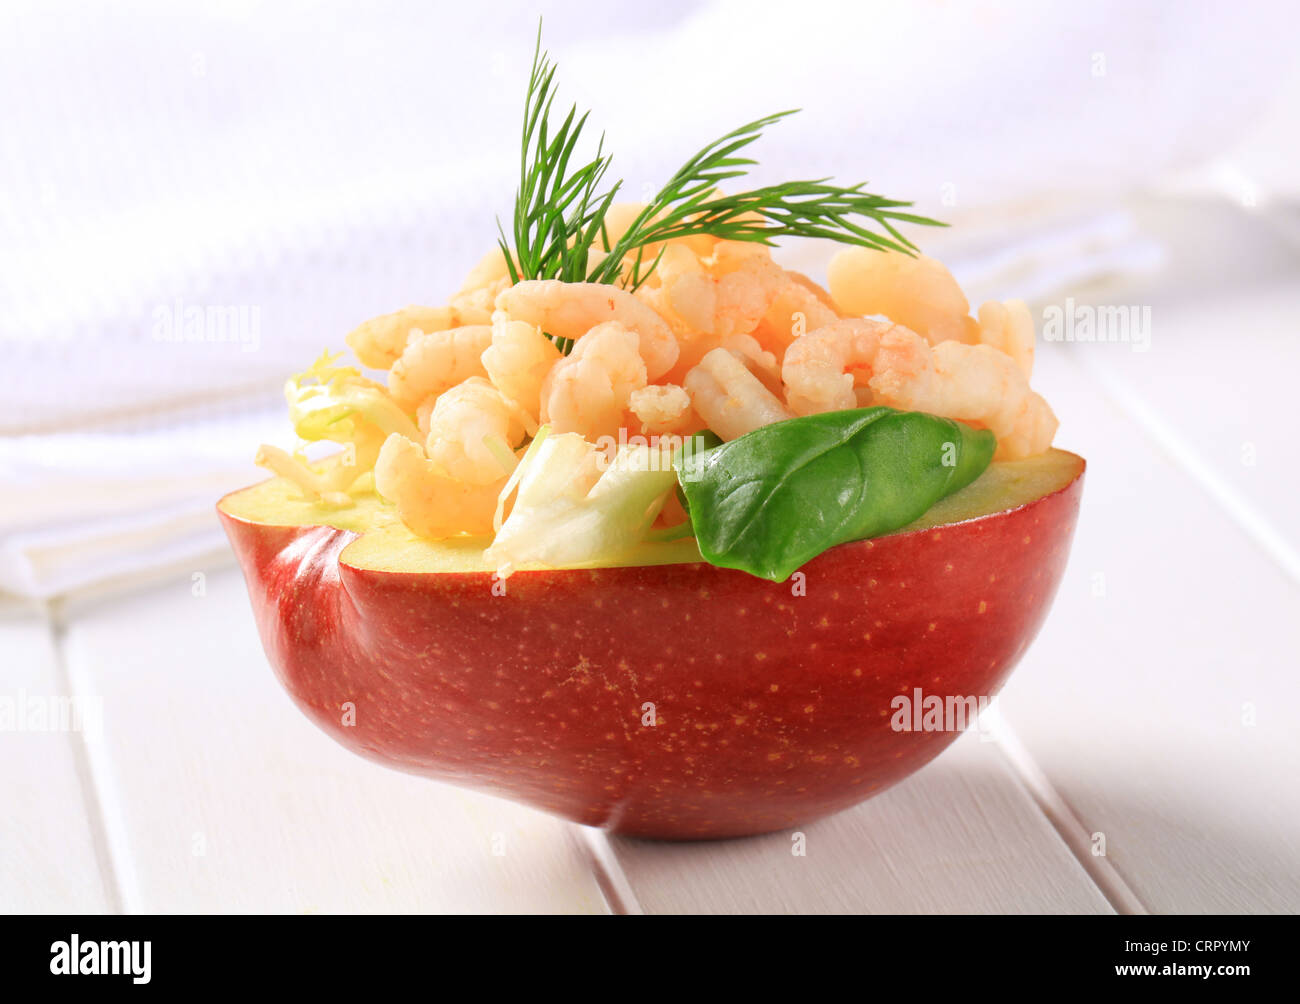 Half apple topped with shrimps Stock Photo